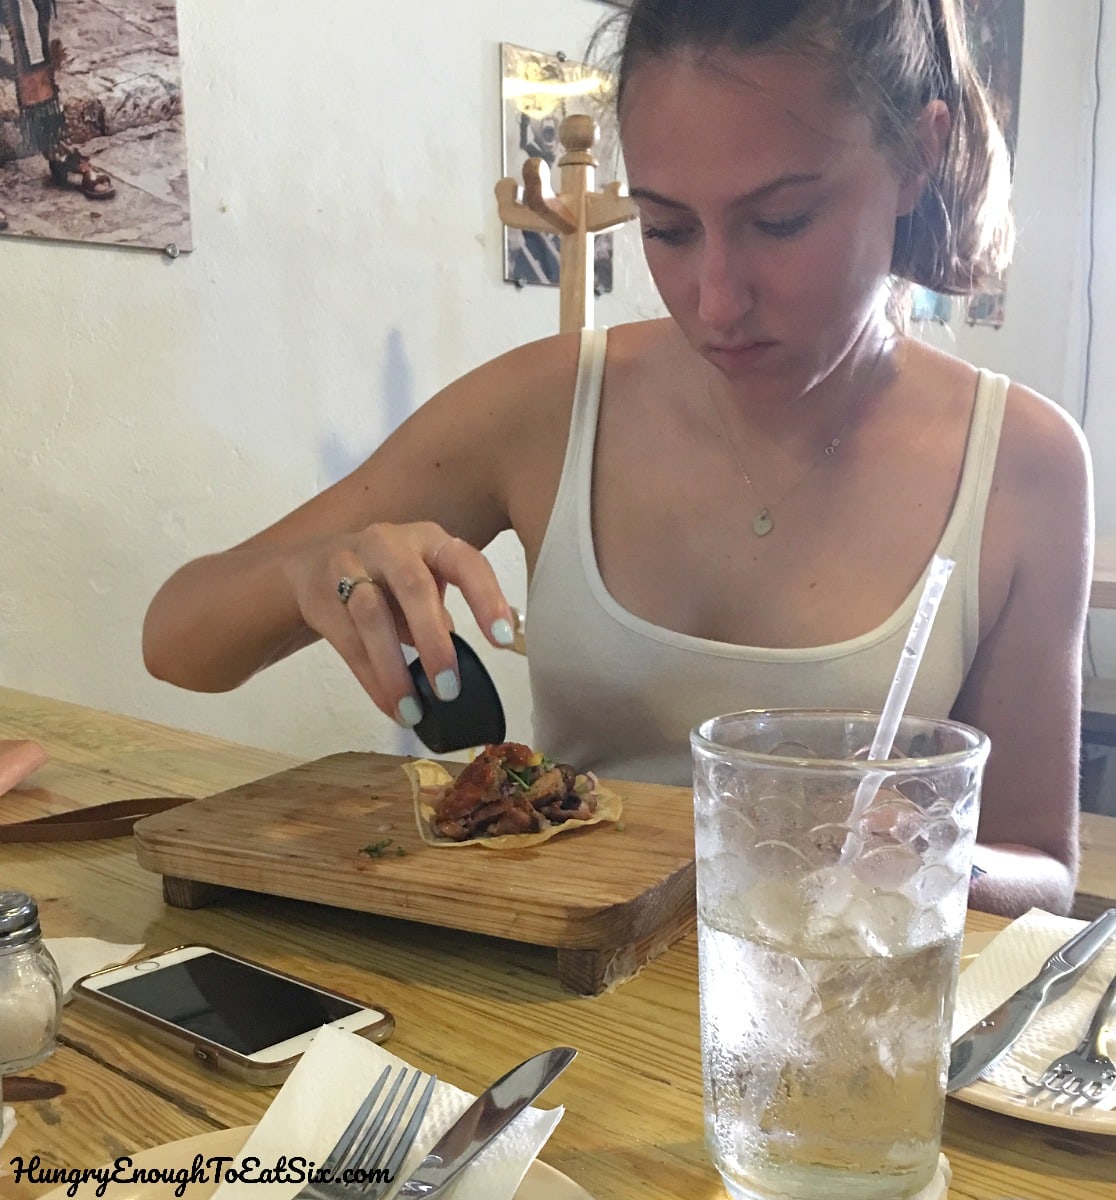 Girl pouring sauce on a taco